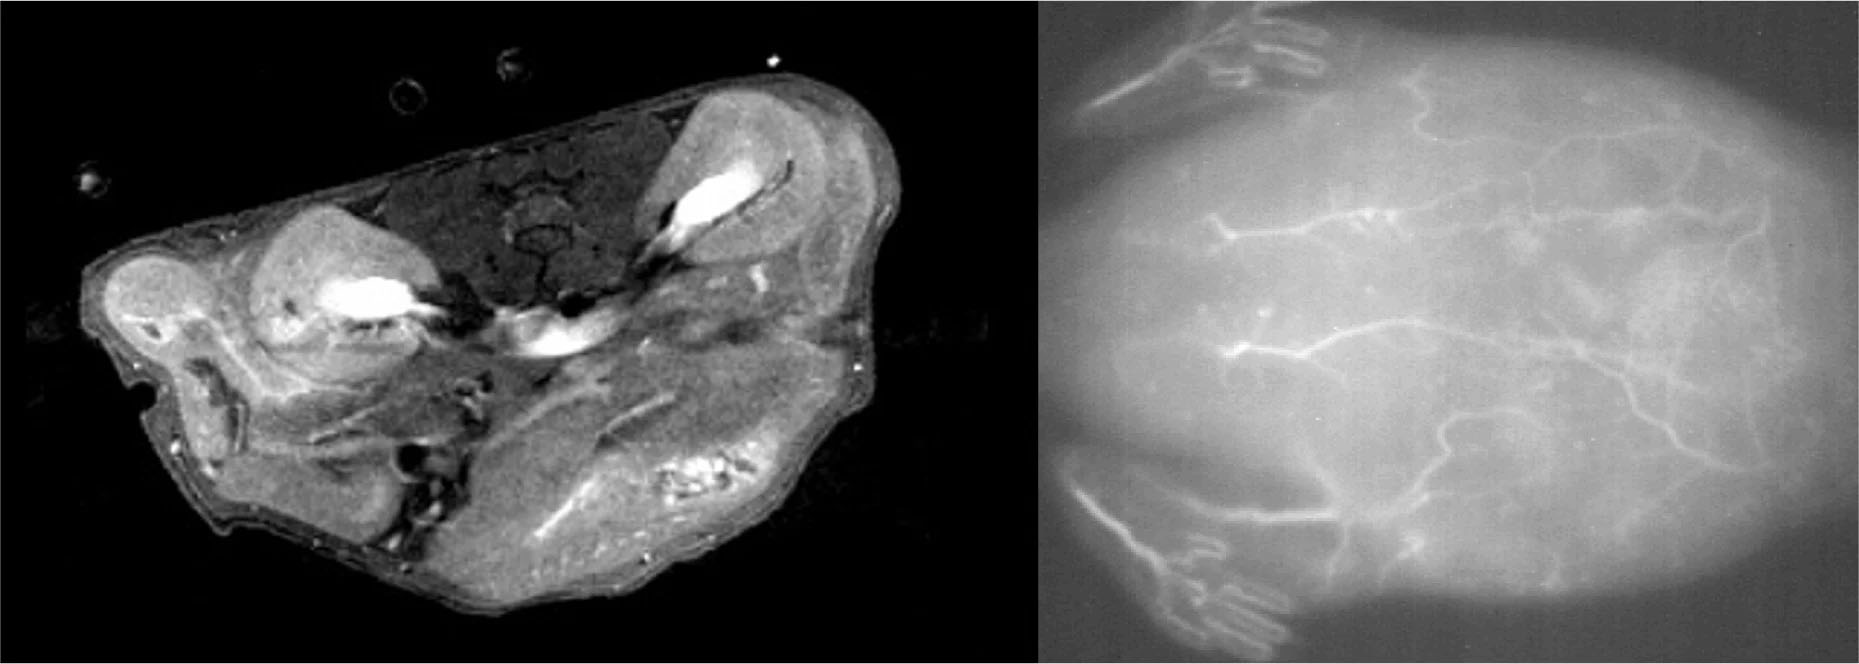 MRI (left) and near-infrared fluorescence (right) scans of tissues and blood vessels